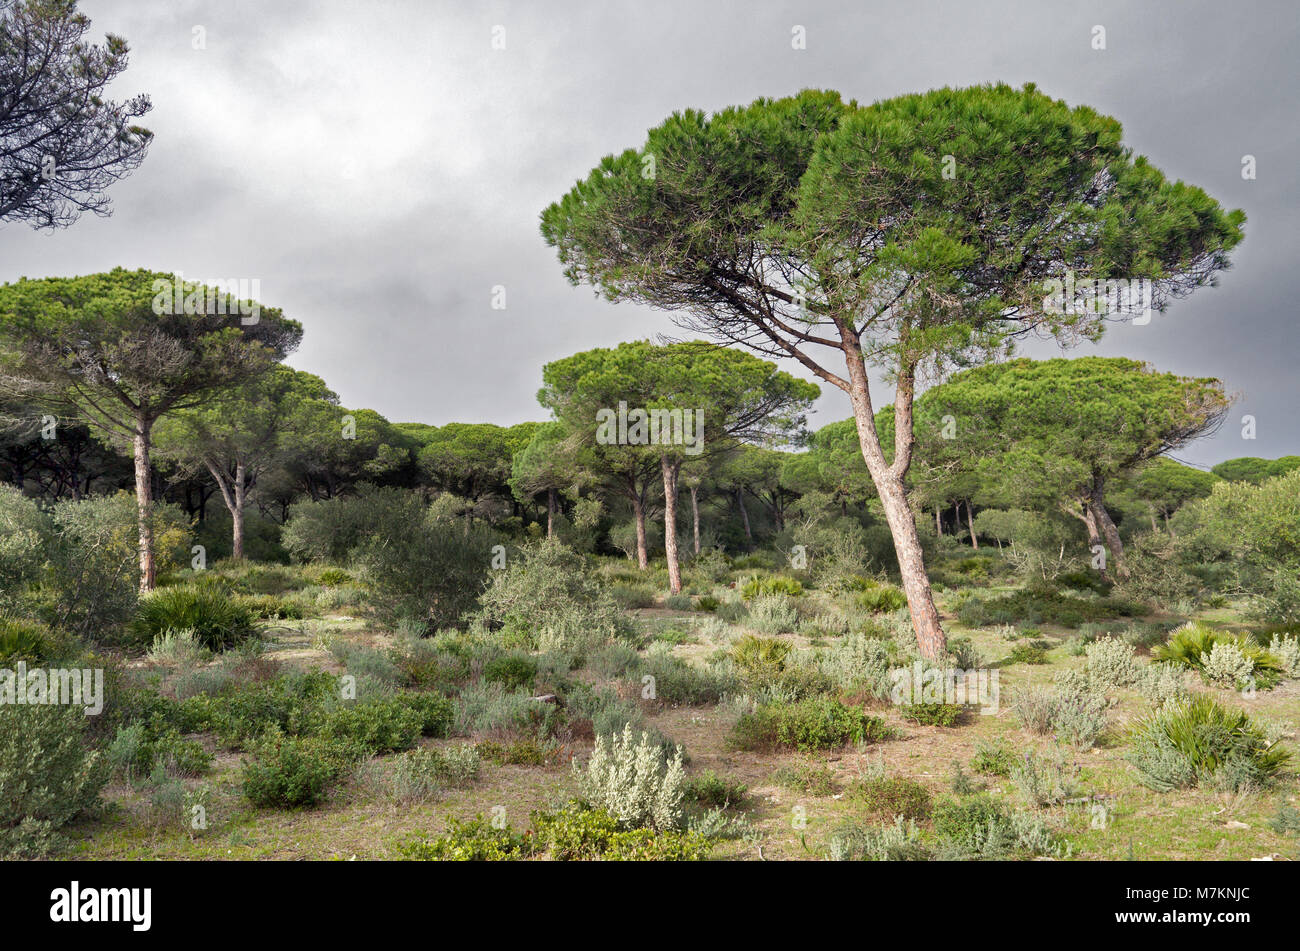 Breña y Marismas de Barbate Natural Park is the 2nd largest coastal reserve in Spain's Andalusia region. Here are seen pine forested coastal slopes. Stock Photo